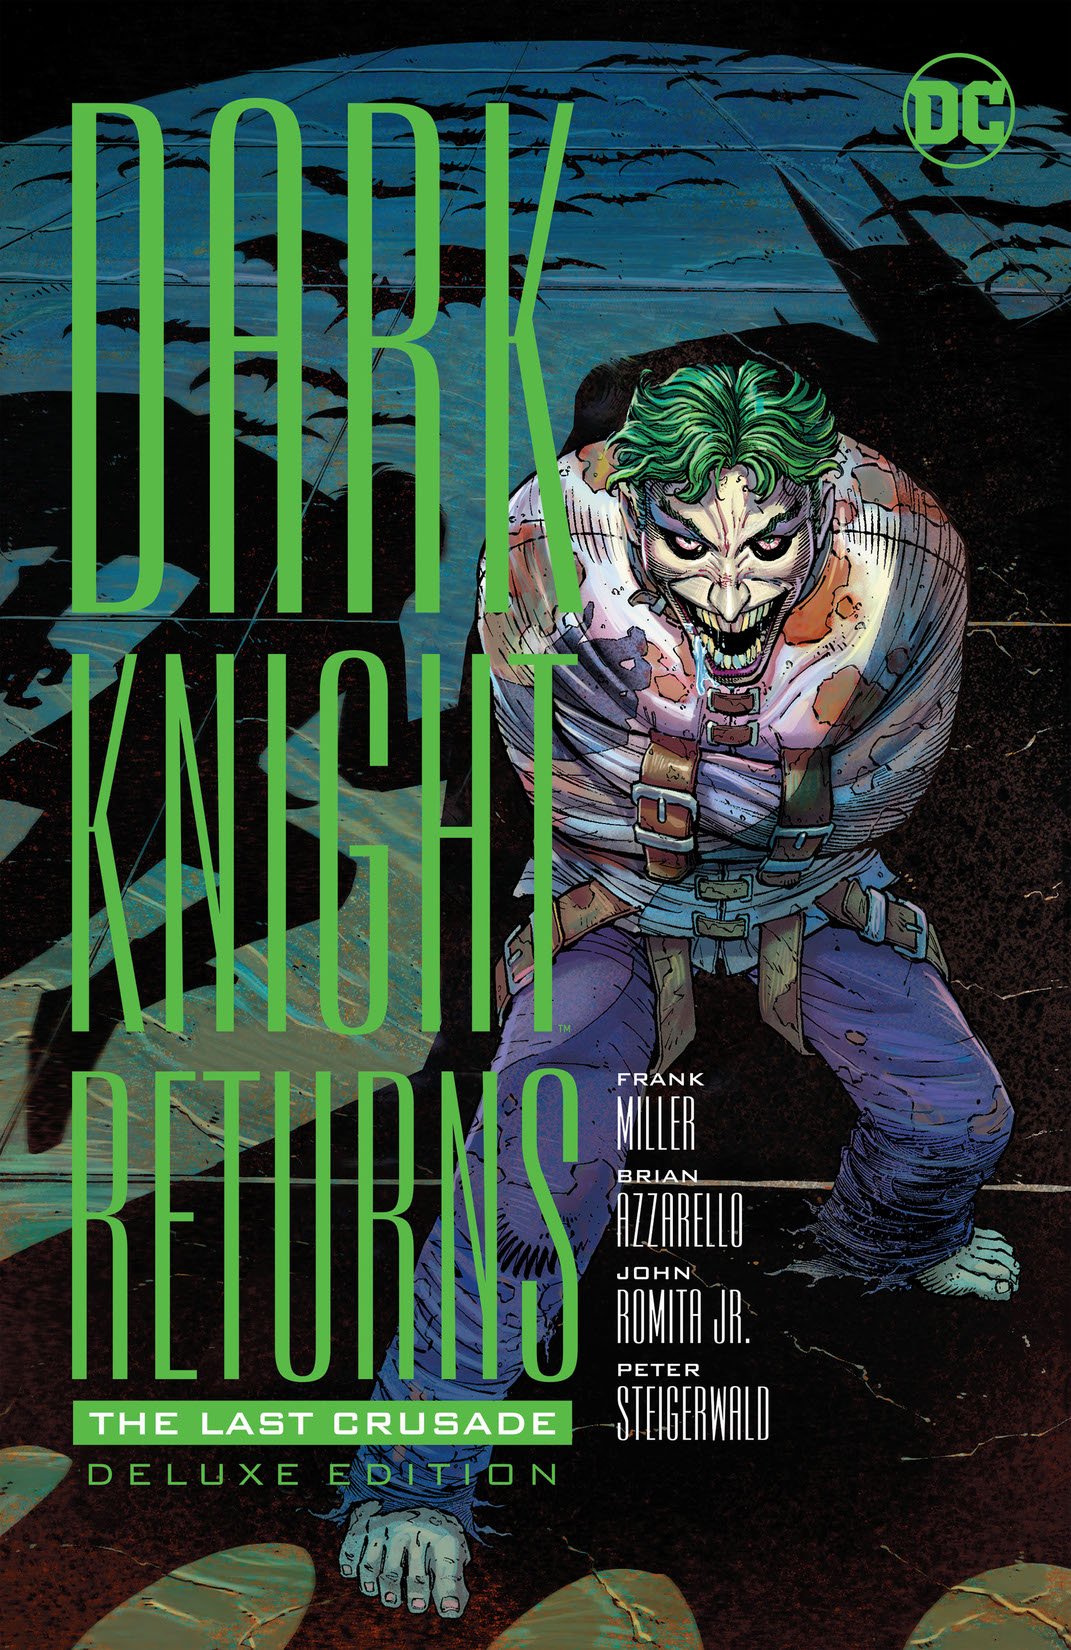 The Dark Knight Returns: The Last Crusade Deluxe Edition preview images